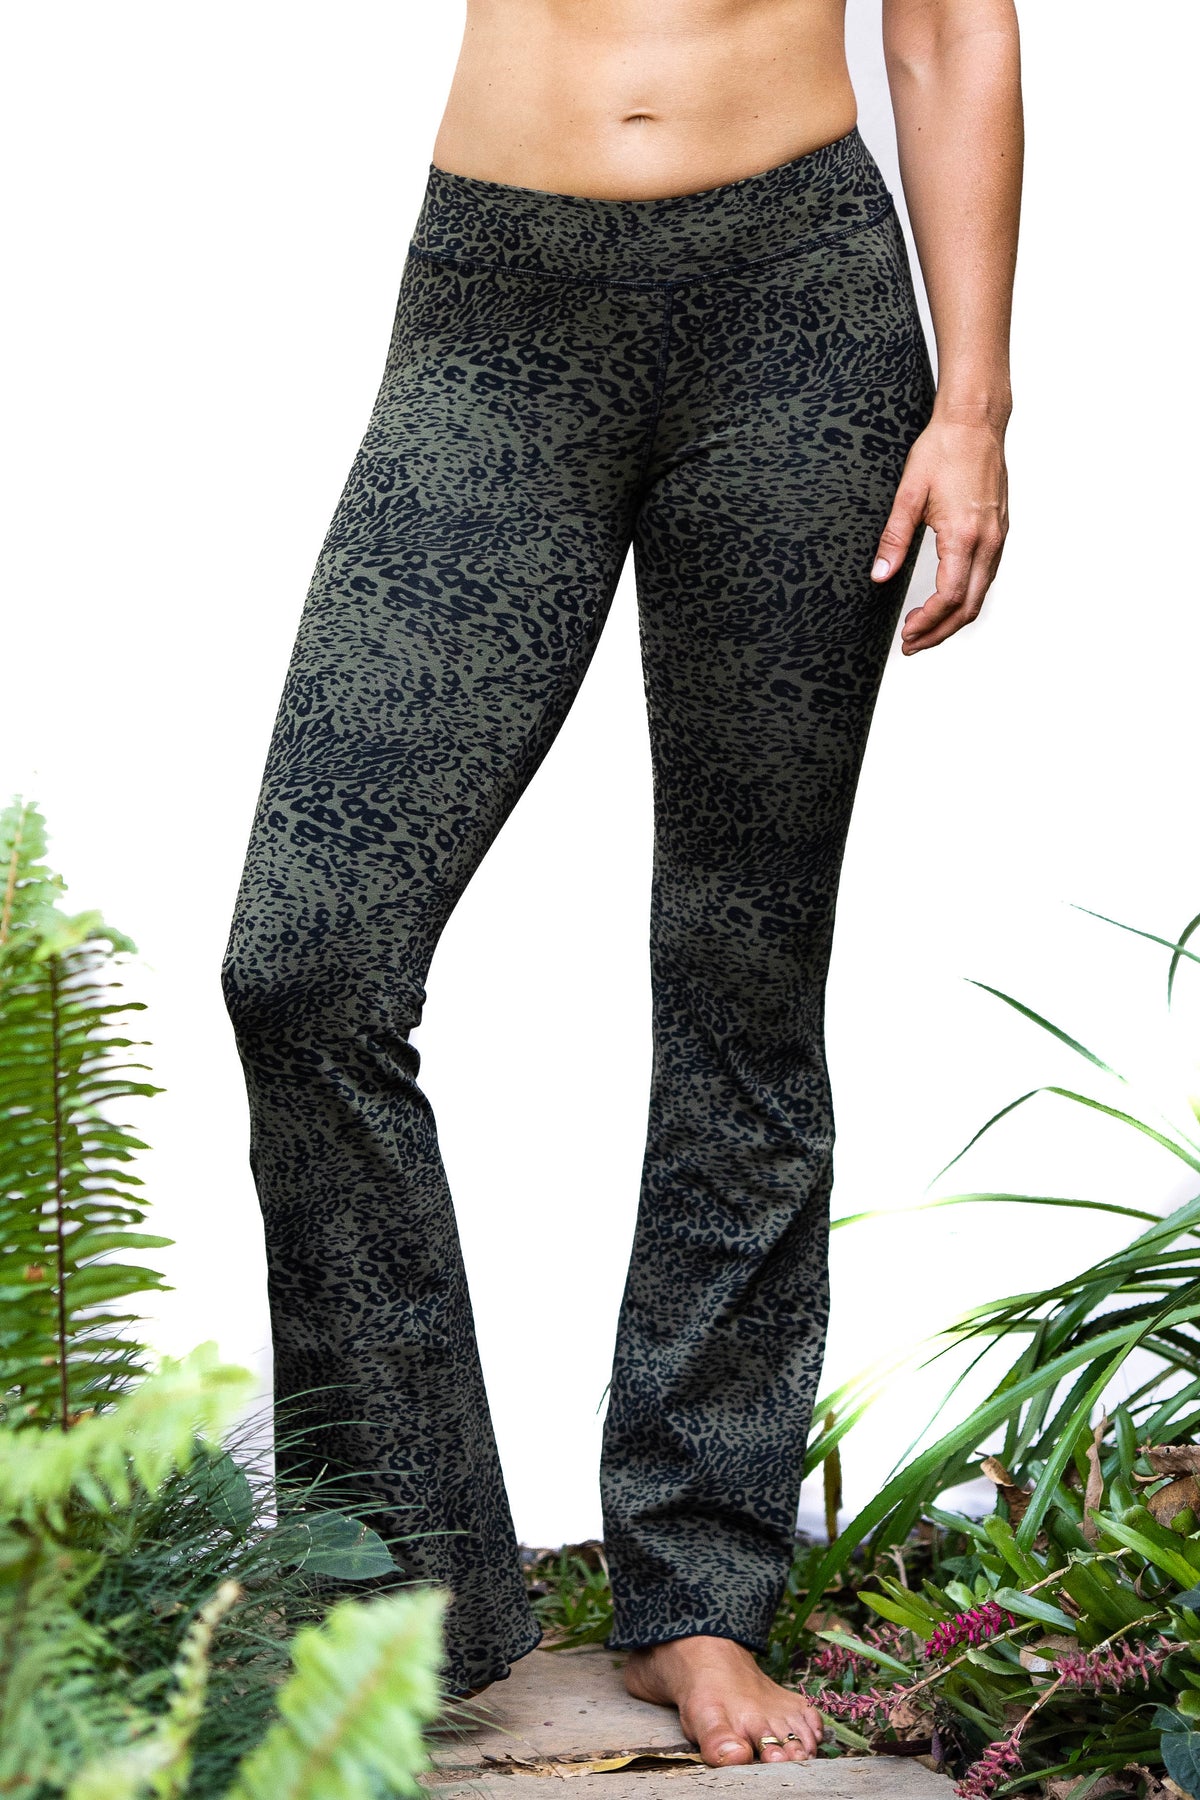 Super High Waist Leggings Tights - Olive Green Leopard – FUNKY SIMPLICITY